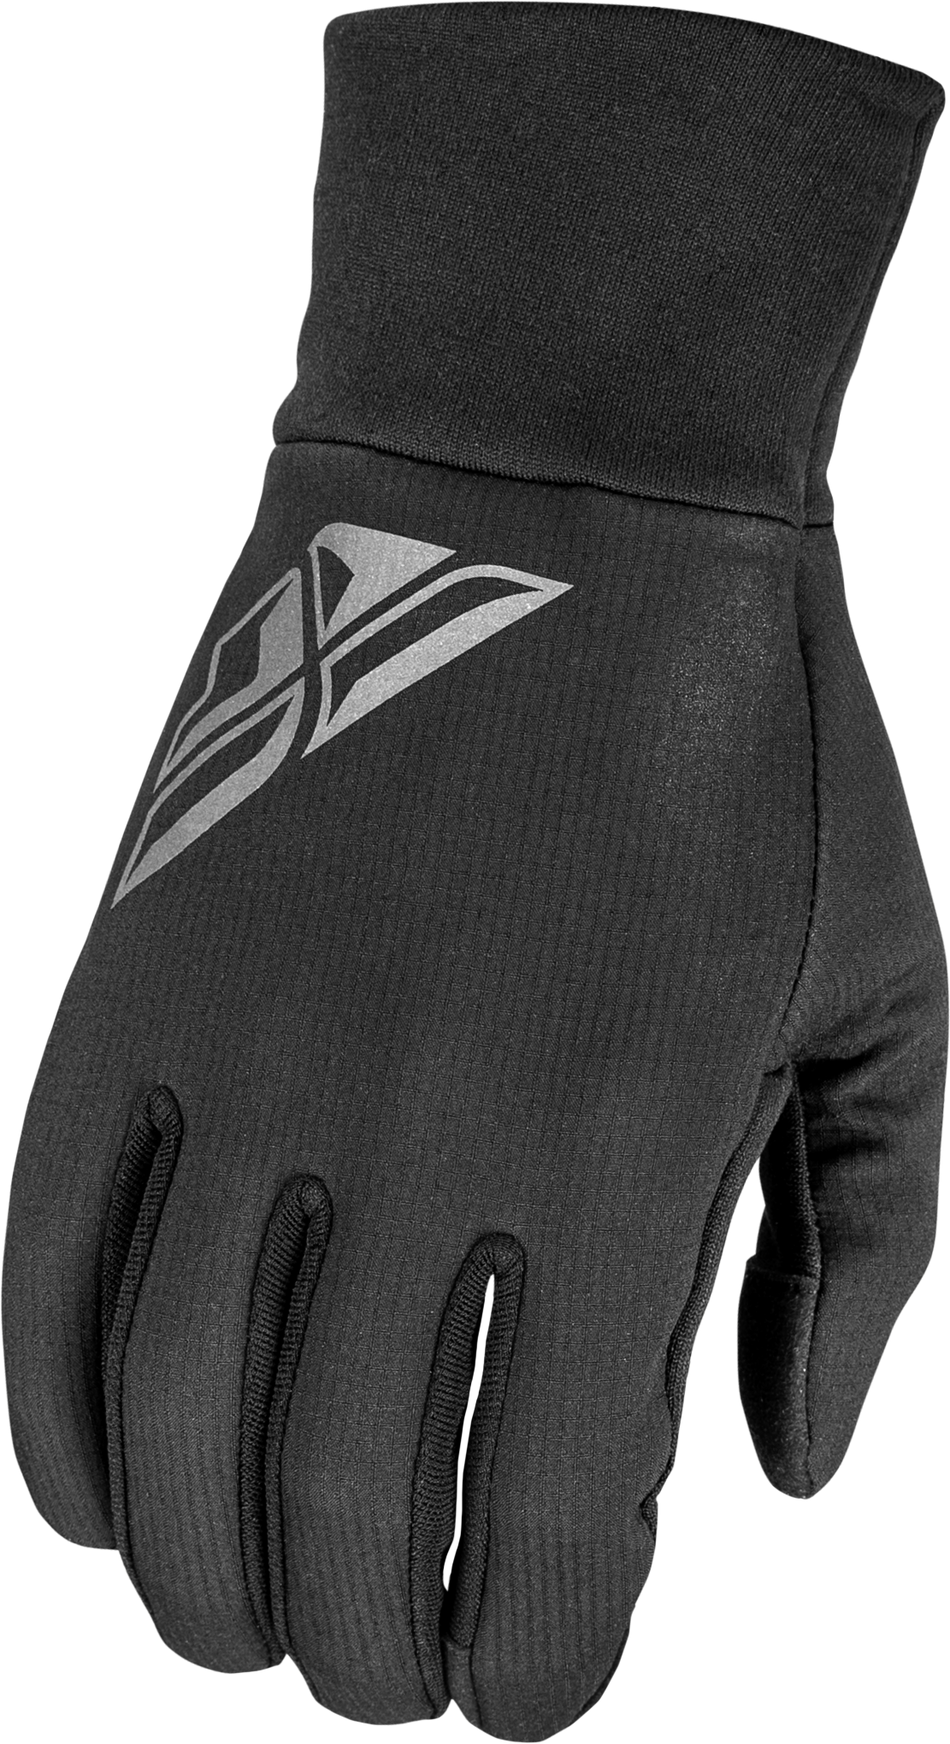 FLY RACING Glove Liners Black Xl 363-3960X